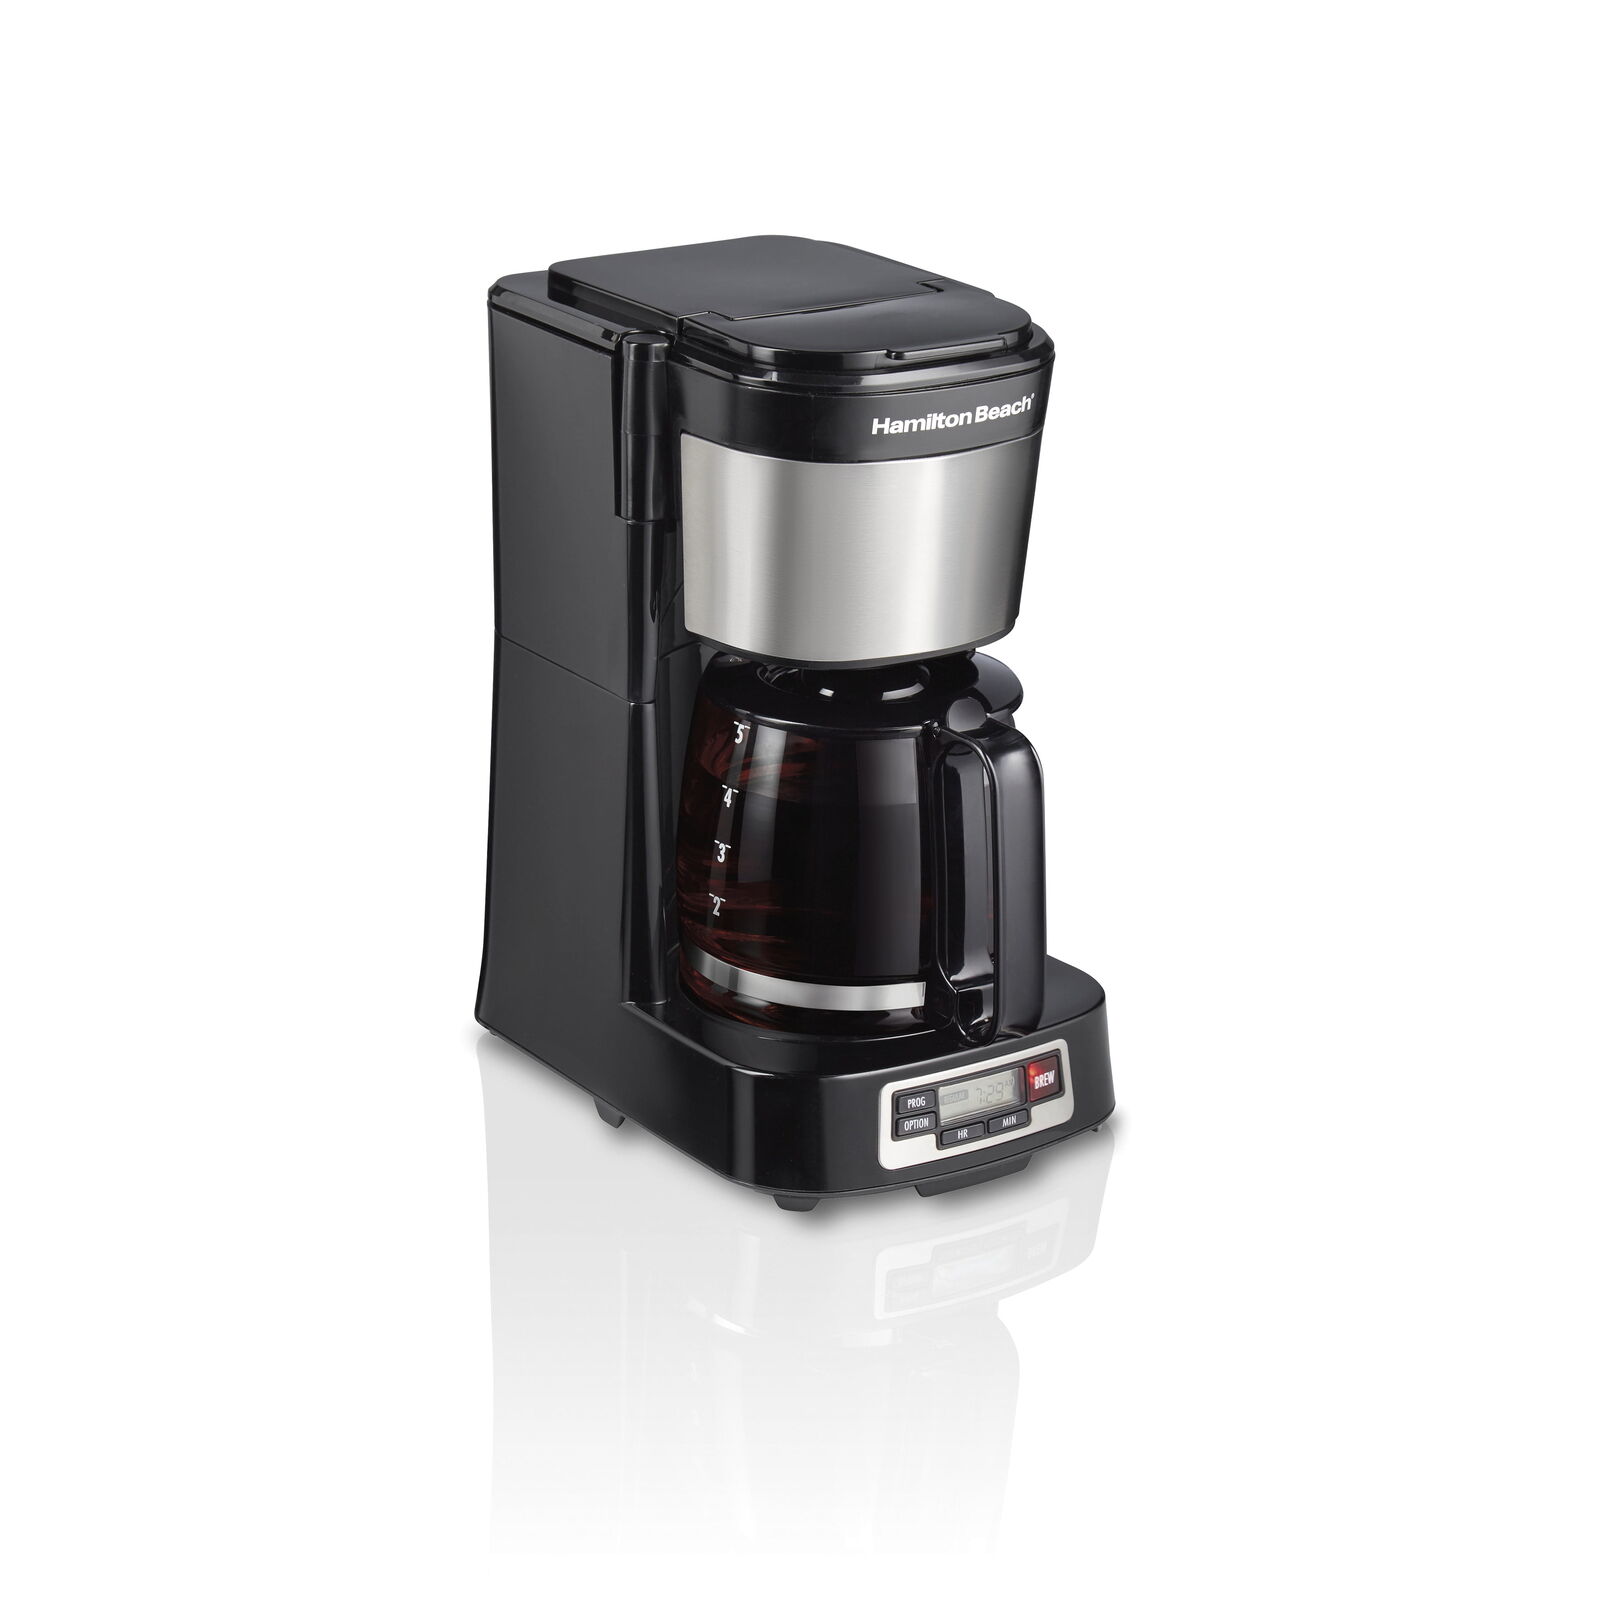 5 Cup Compact Coffee Maker, Programmable, Glass Carafe, Model 46111